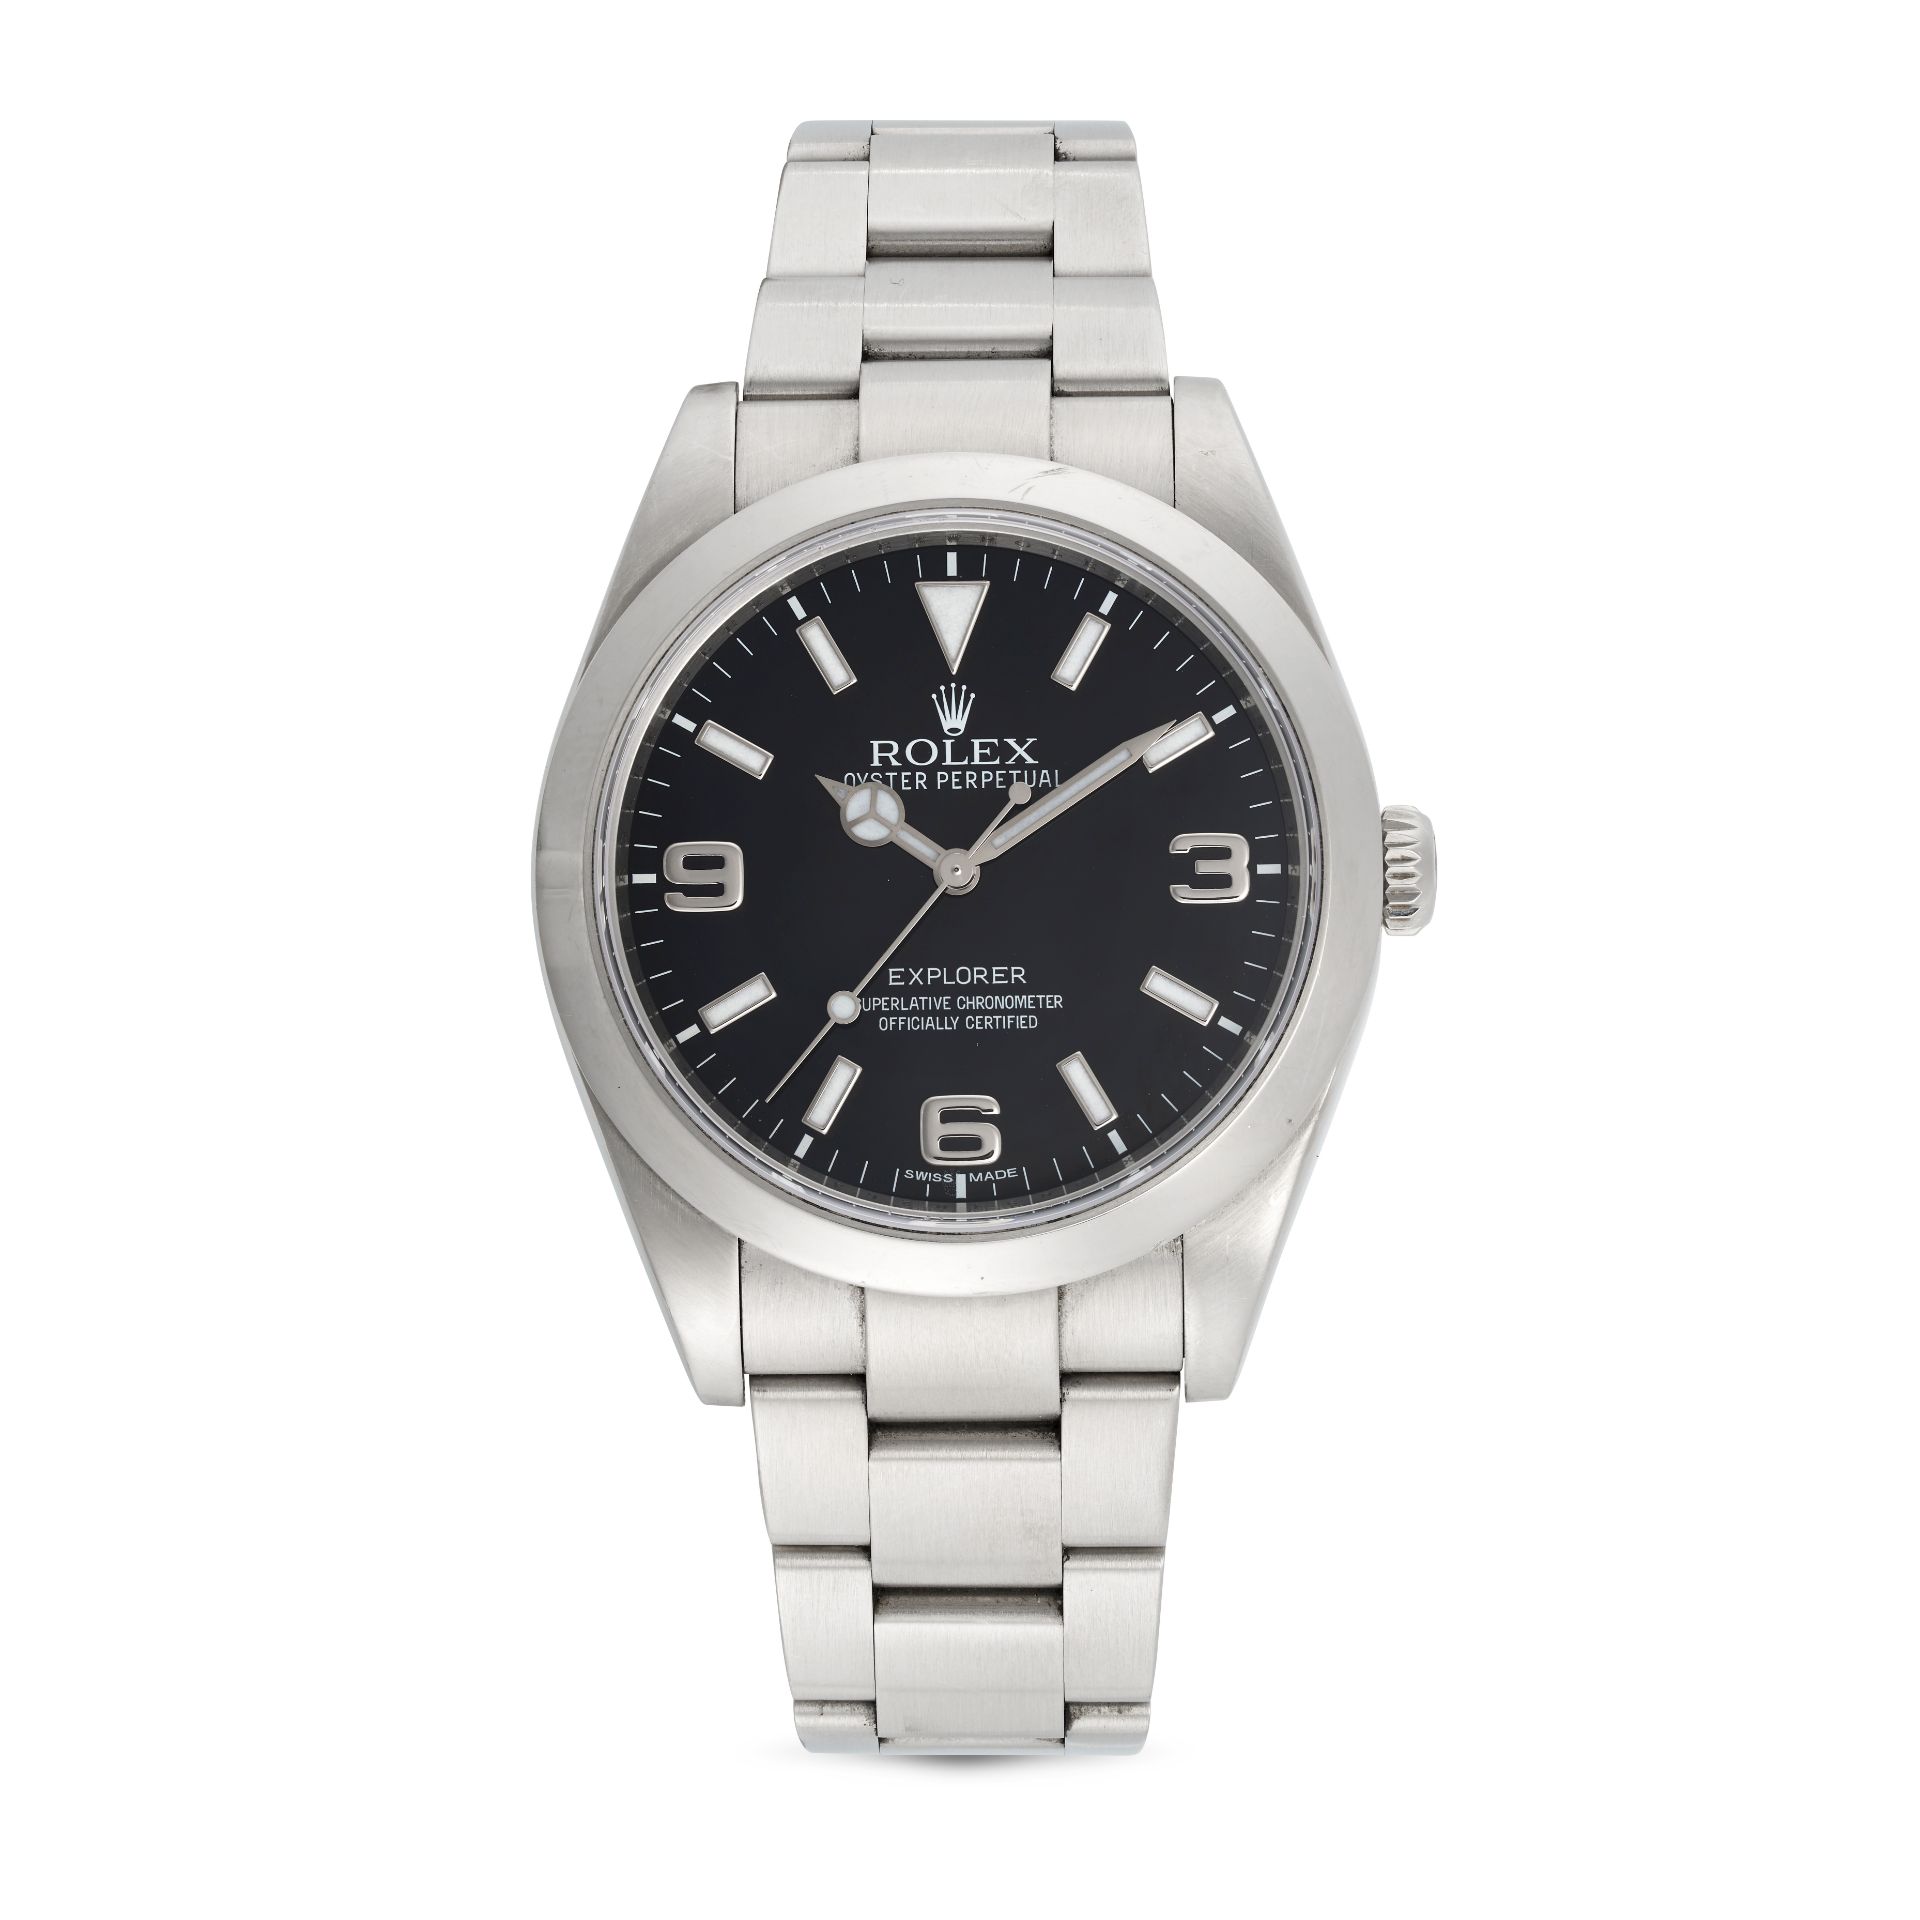 ROLEX - A ROLEX OYSTER PERPETUAL EXPLORER WRISTWATCH in stainless steel, 214270, c.2013, the blac...